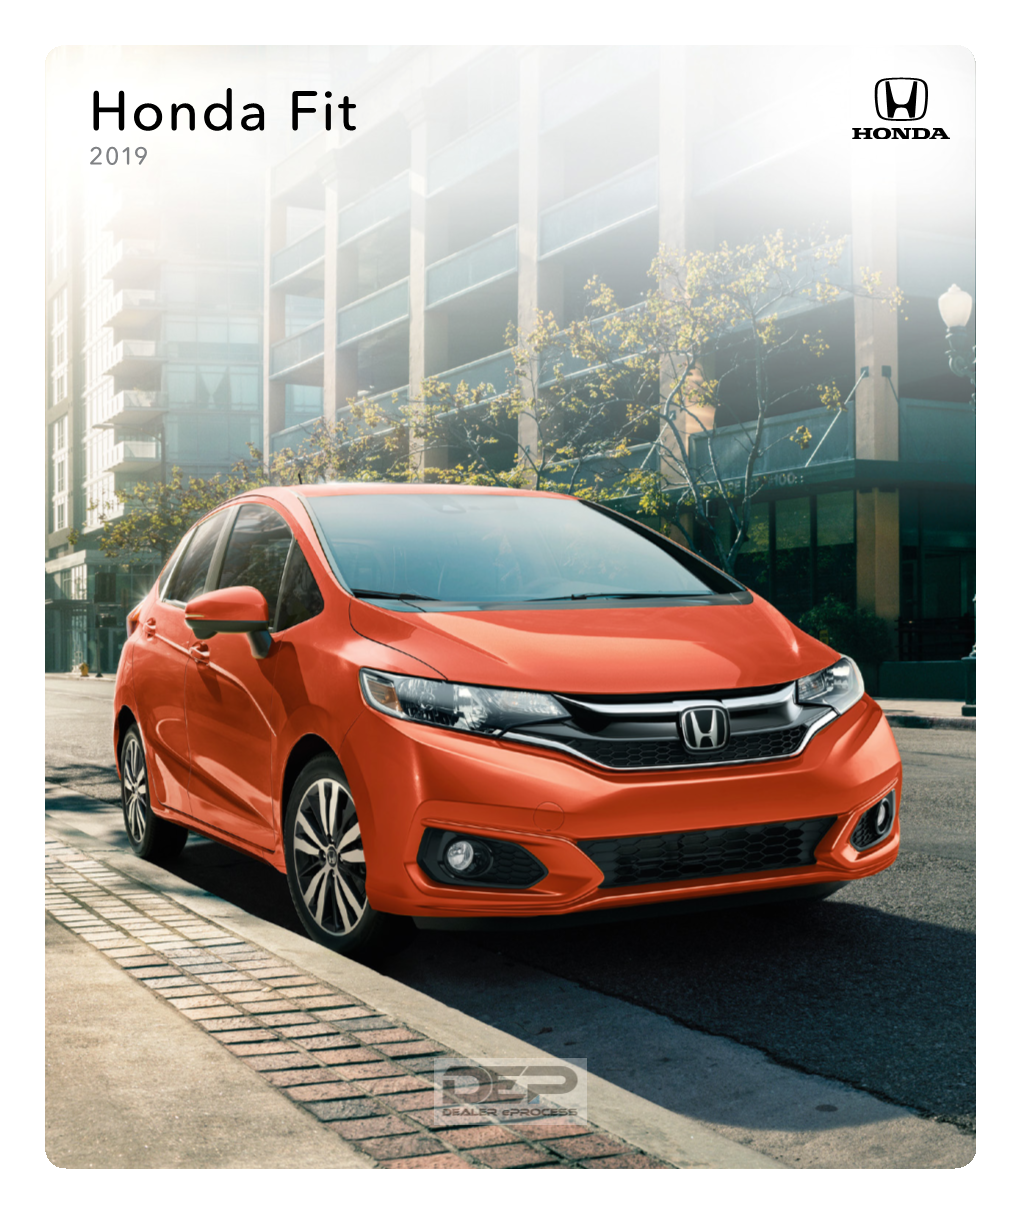 Honda Fit 2019 Fit for Adventure